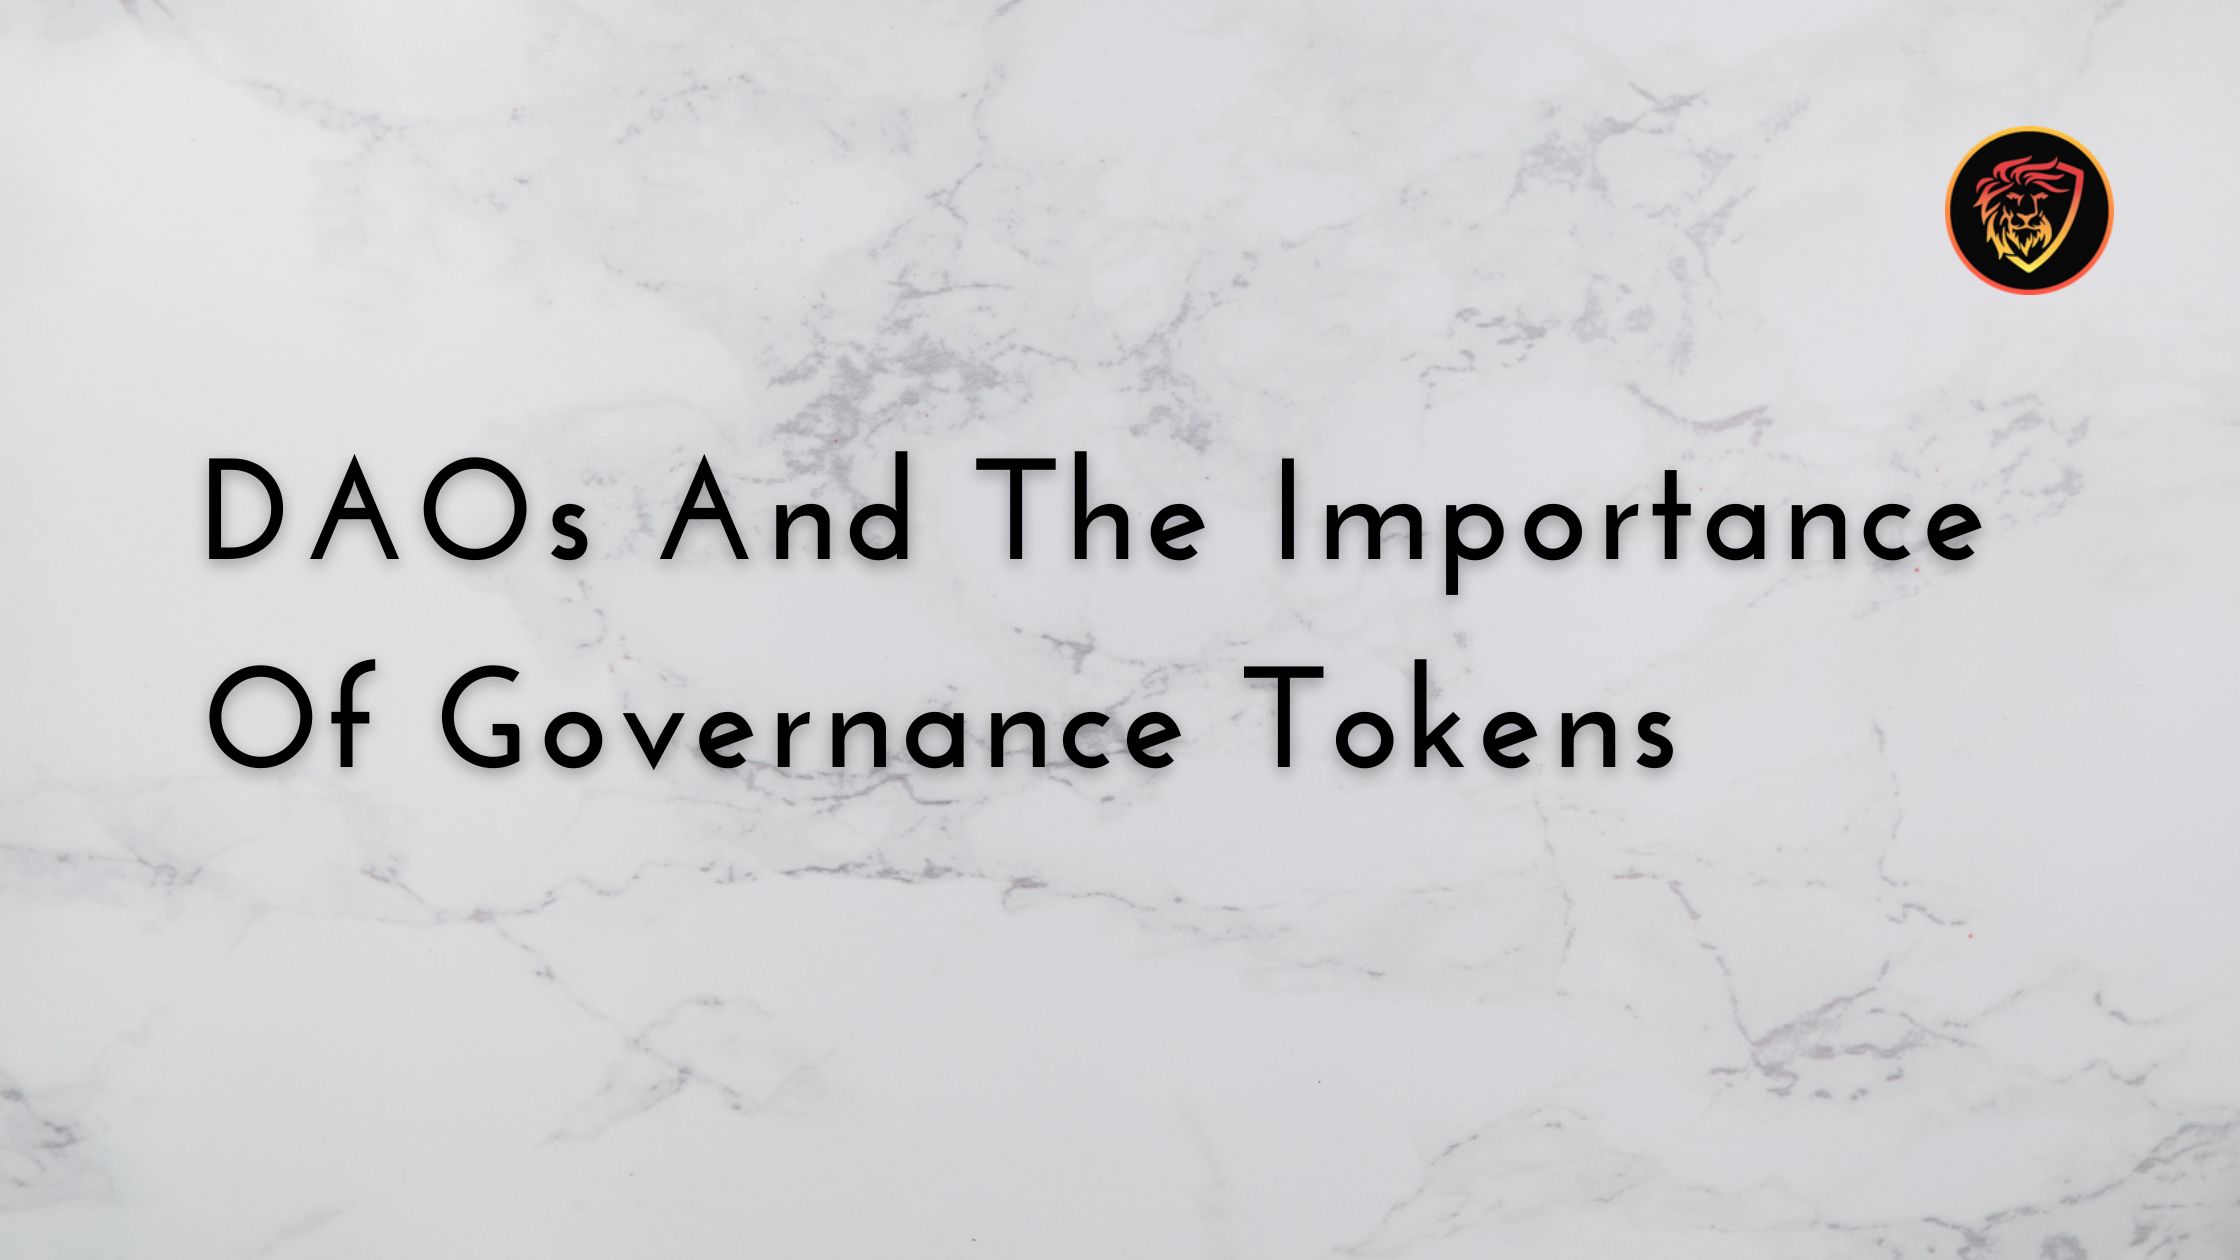 @brando28/daos-and-the-importance-of-governance-tokens